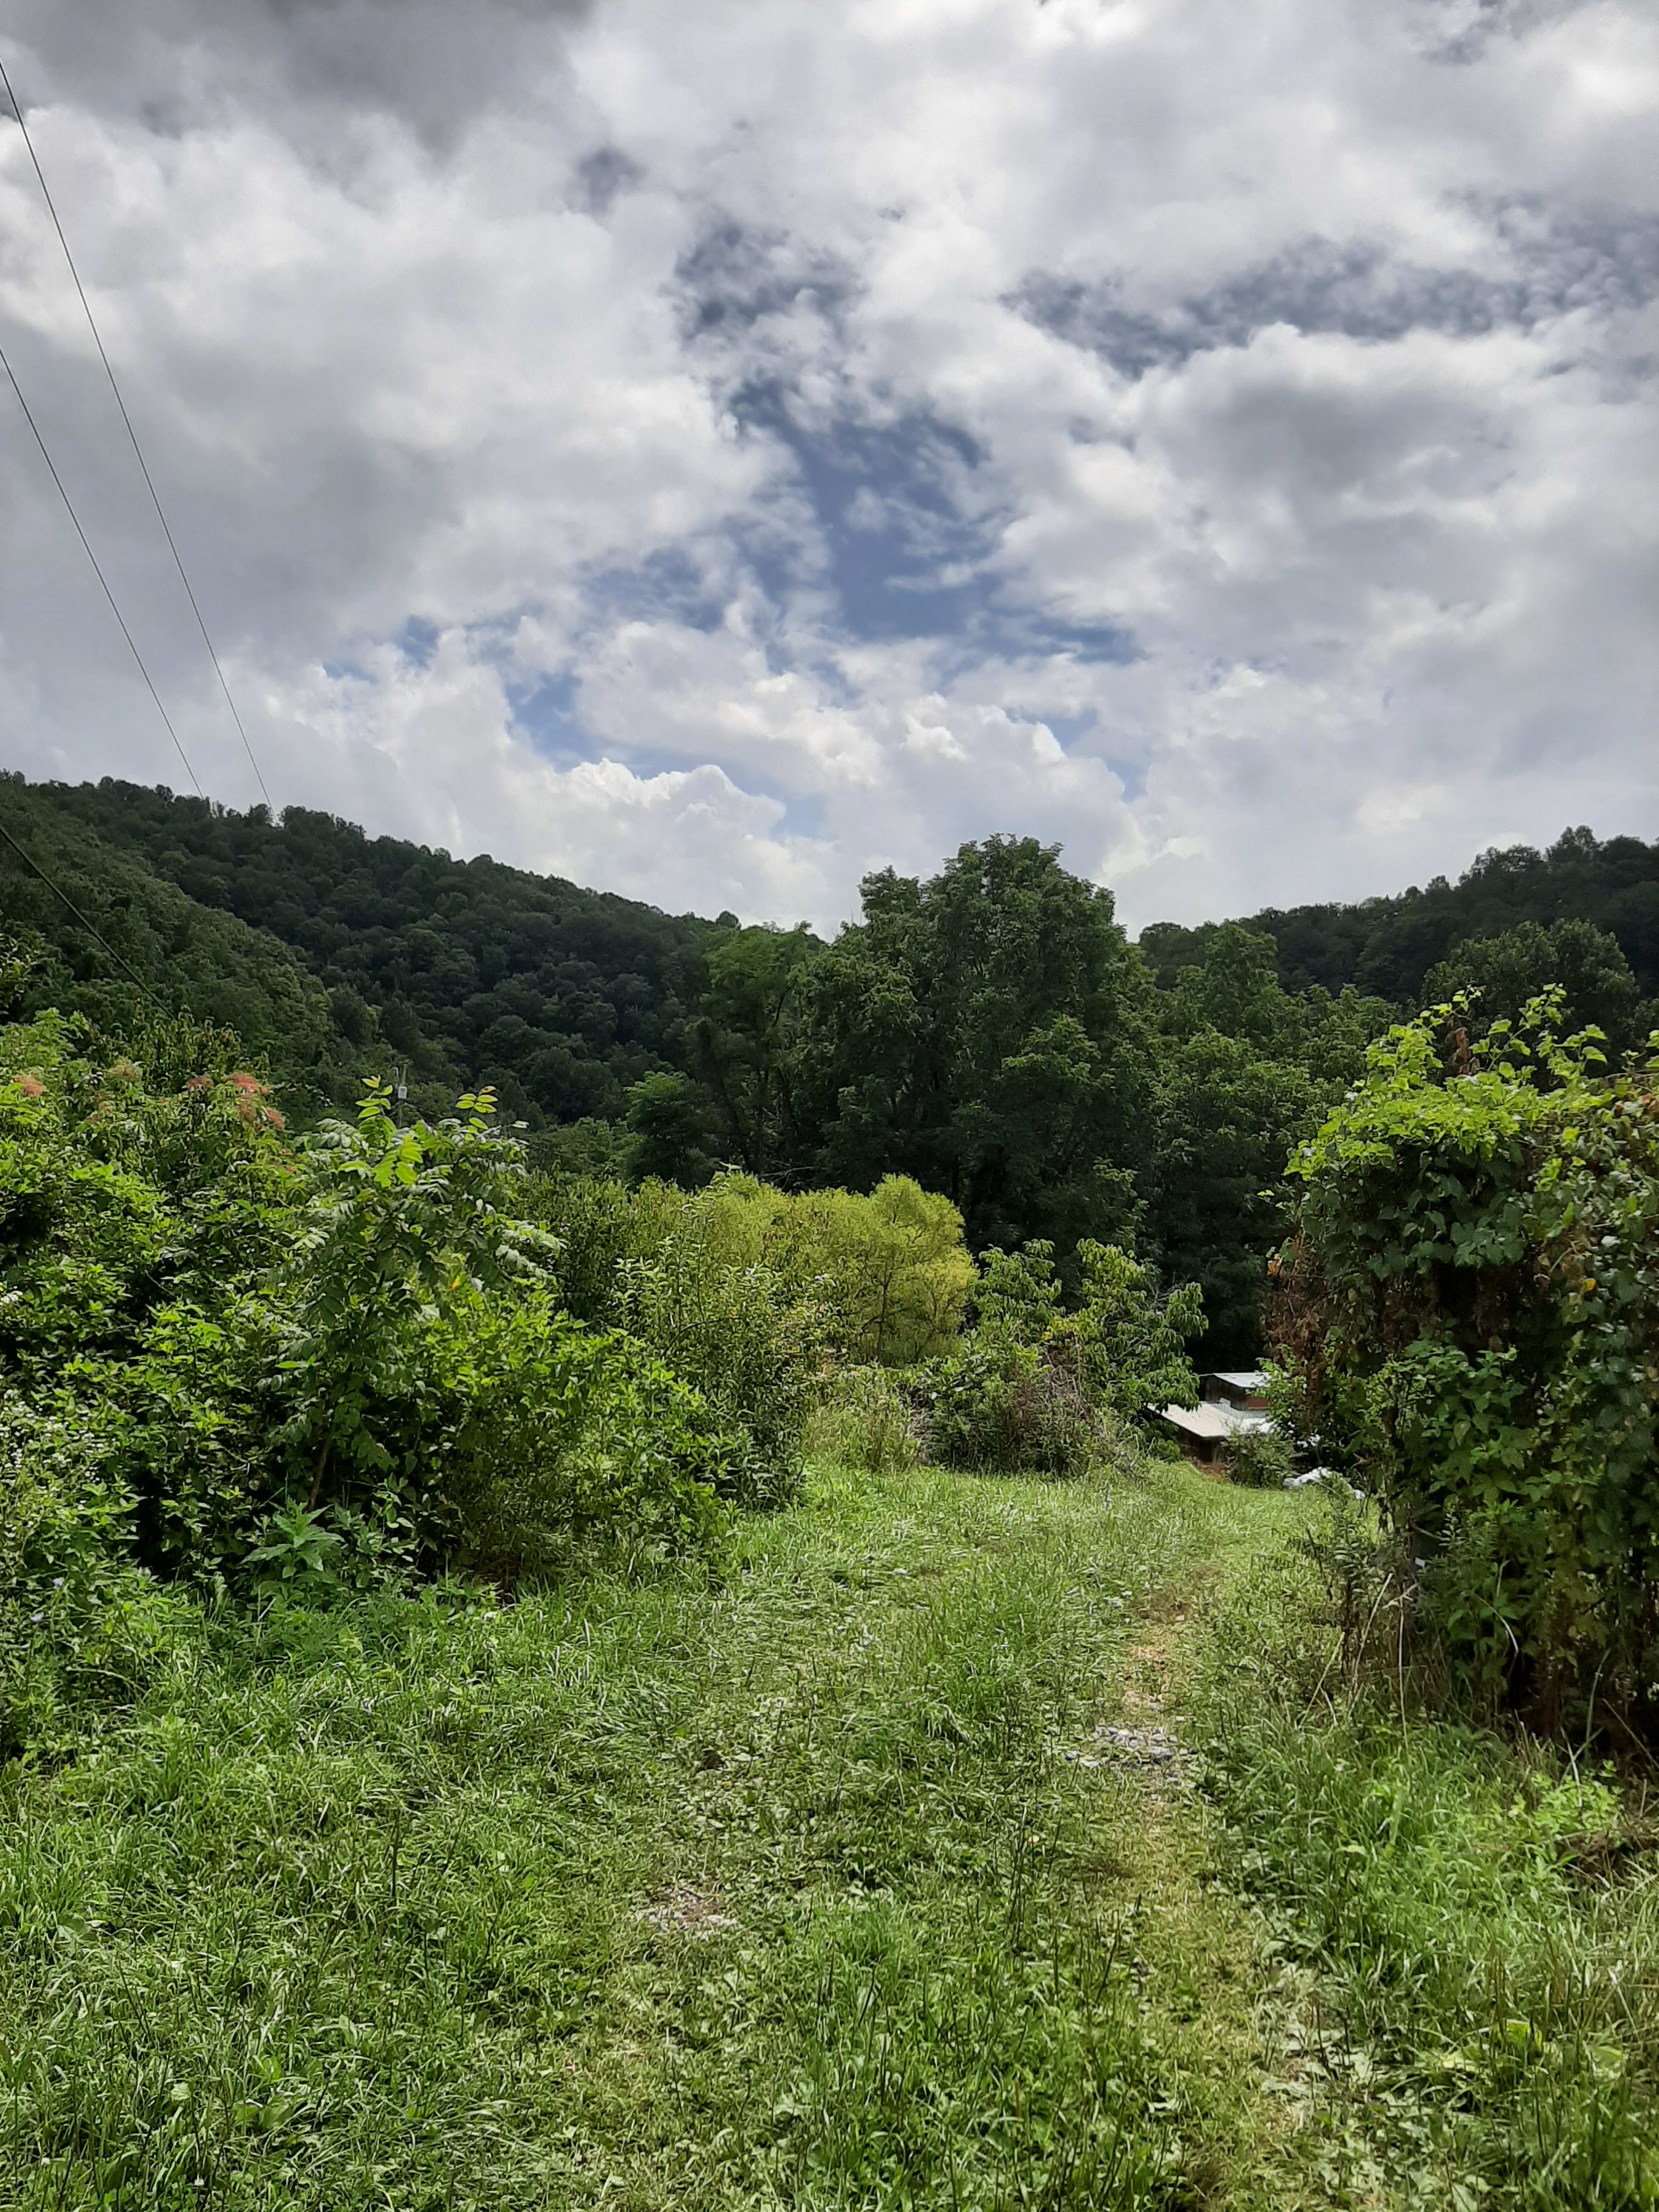 This is your approach to Holleruljah through the pear orchard. Beyond the woods drop down into another very private world where there is a small creek running through mature hardwoods, and waterfalls ranging from 6 ft to 20 feet high.